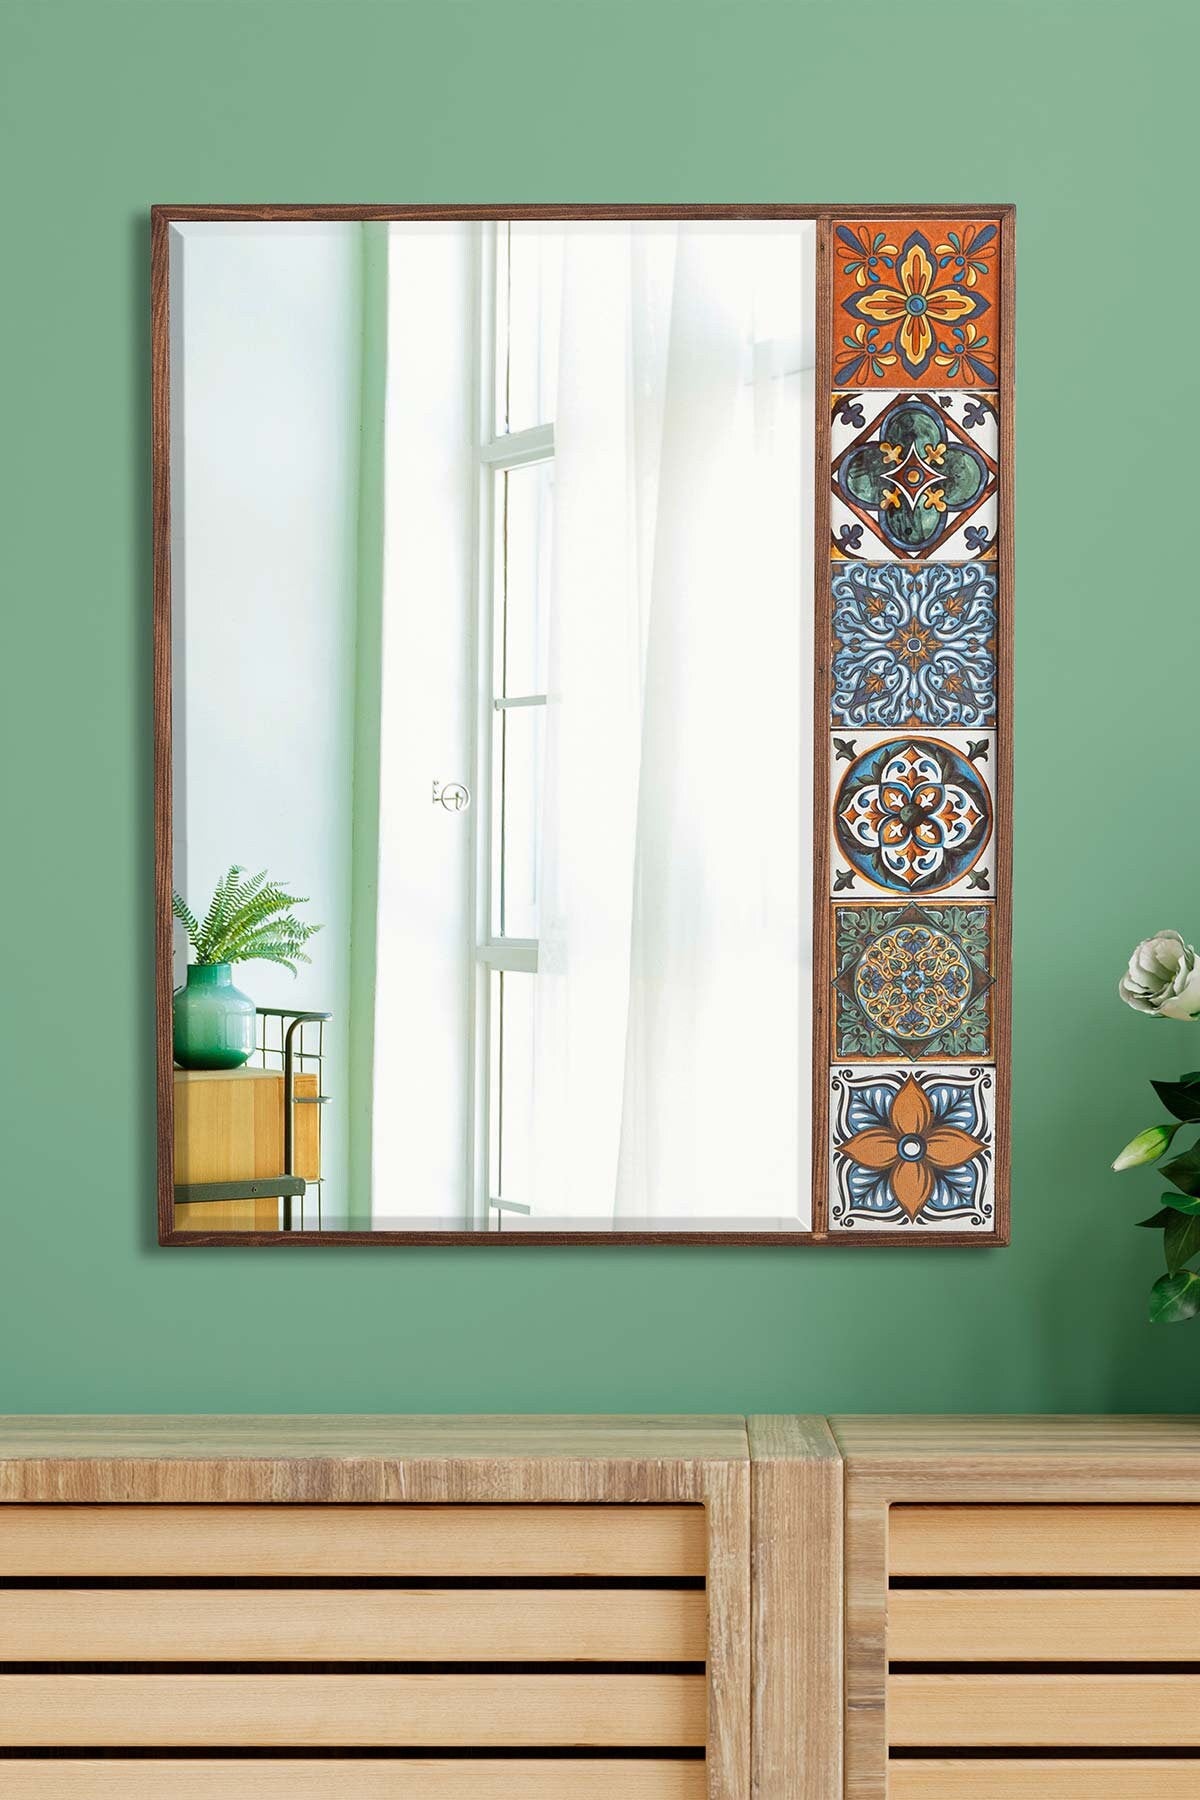 Artisan-Crafted Ceramic Mirror: Handmade Tiles, Real Wood Frame - Unique Home Decor Accent